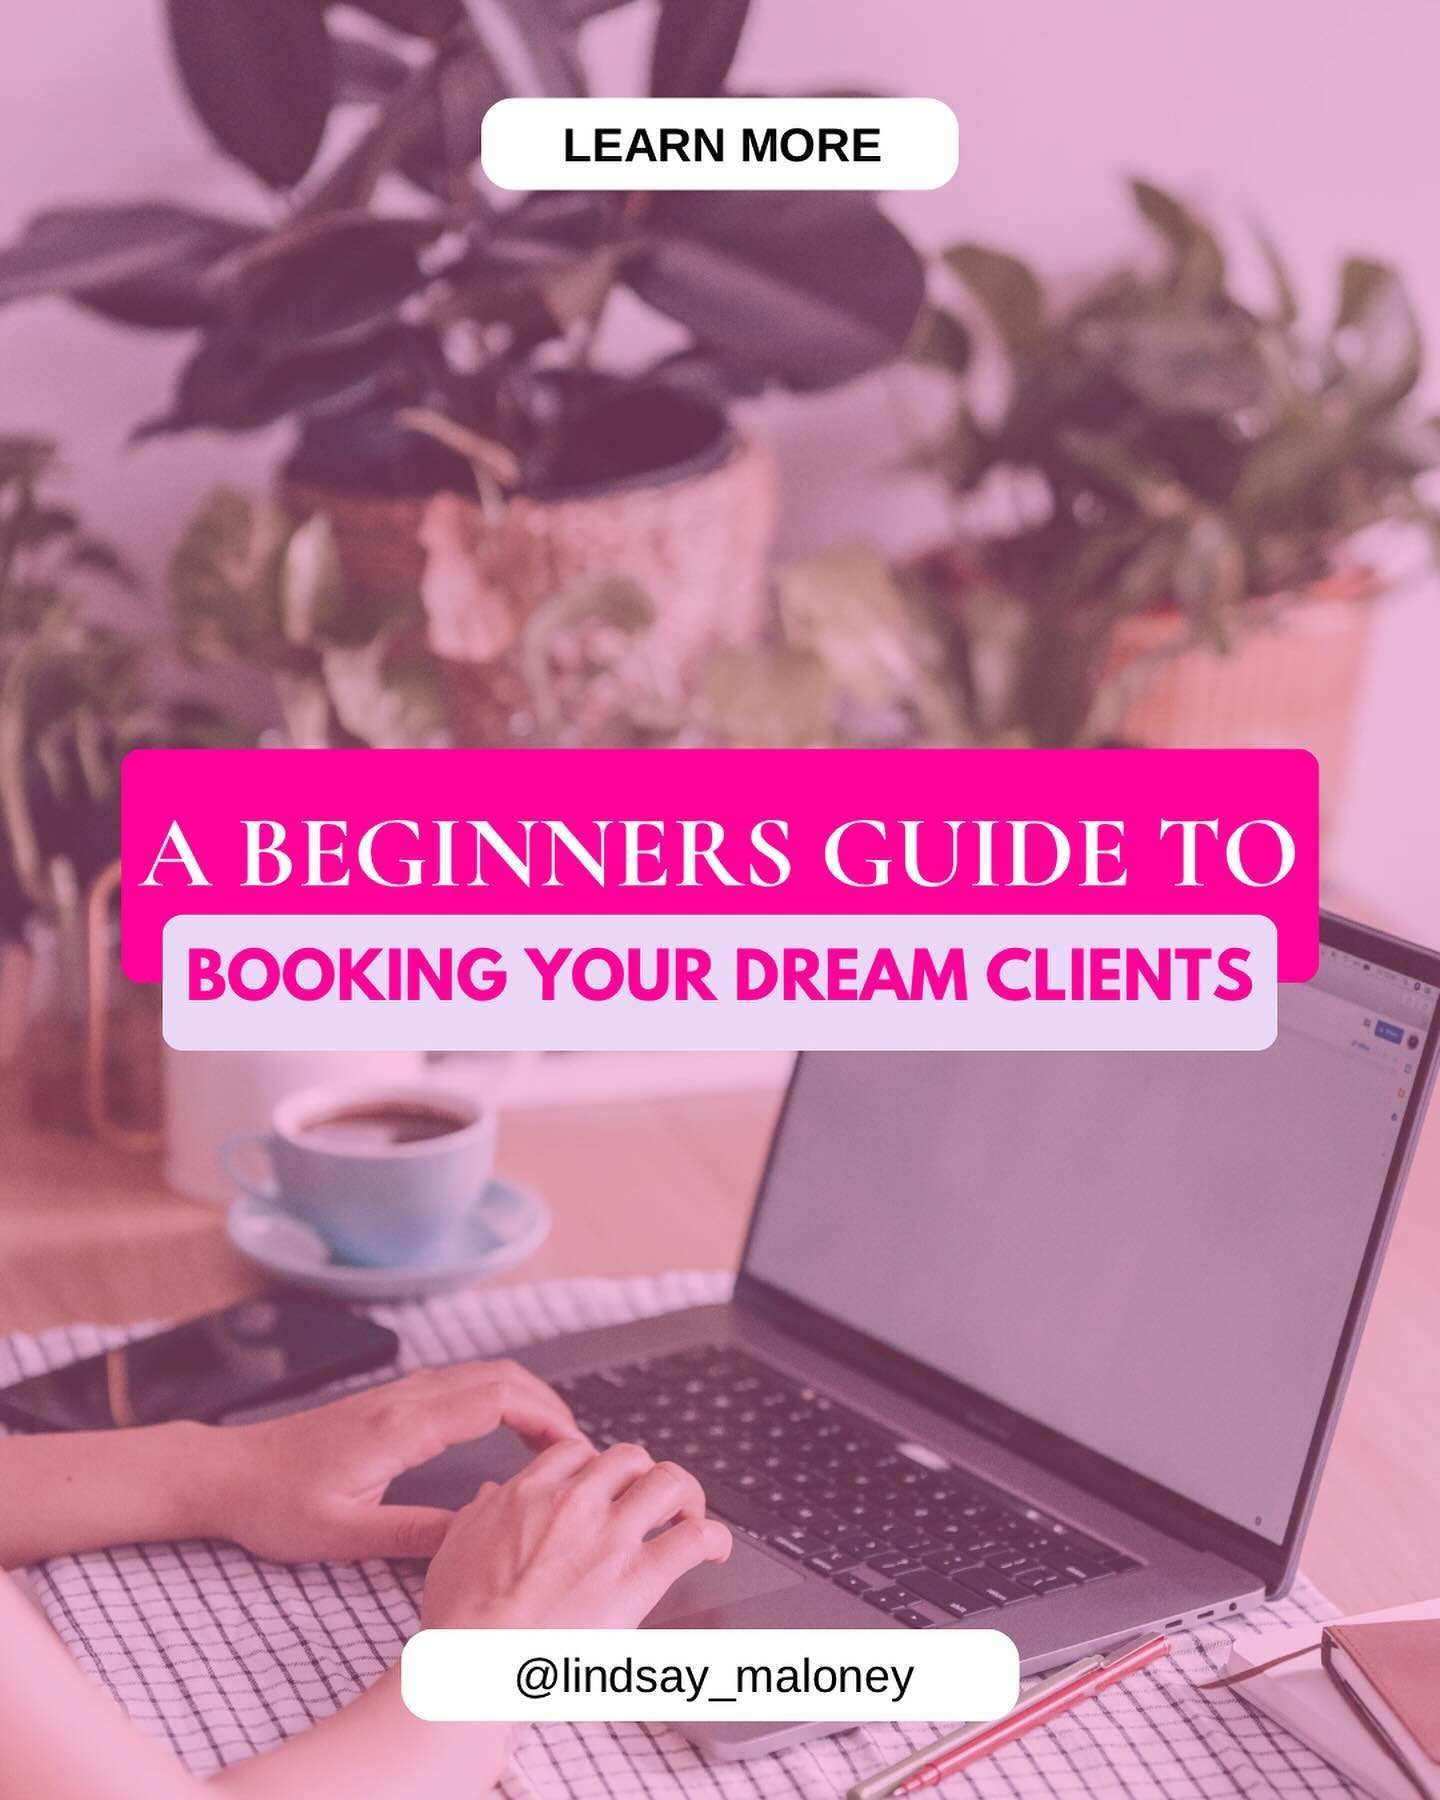 📖 A beginners guide to Booking Your Dream Clients.

#1 Have a point.
I.E. WHY are you doing this? Whether it&rsquo;s because you think it looks fun and you thought you&rsquo;d give it a shot or maybe it&rsquo;s because you want to create a solid inc